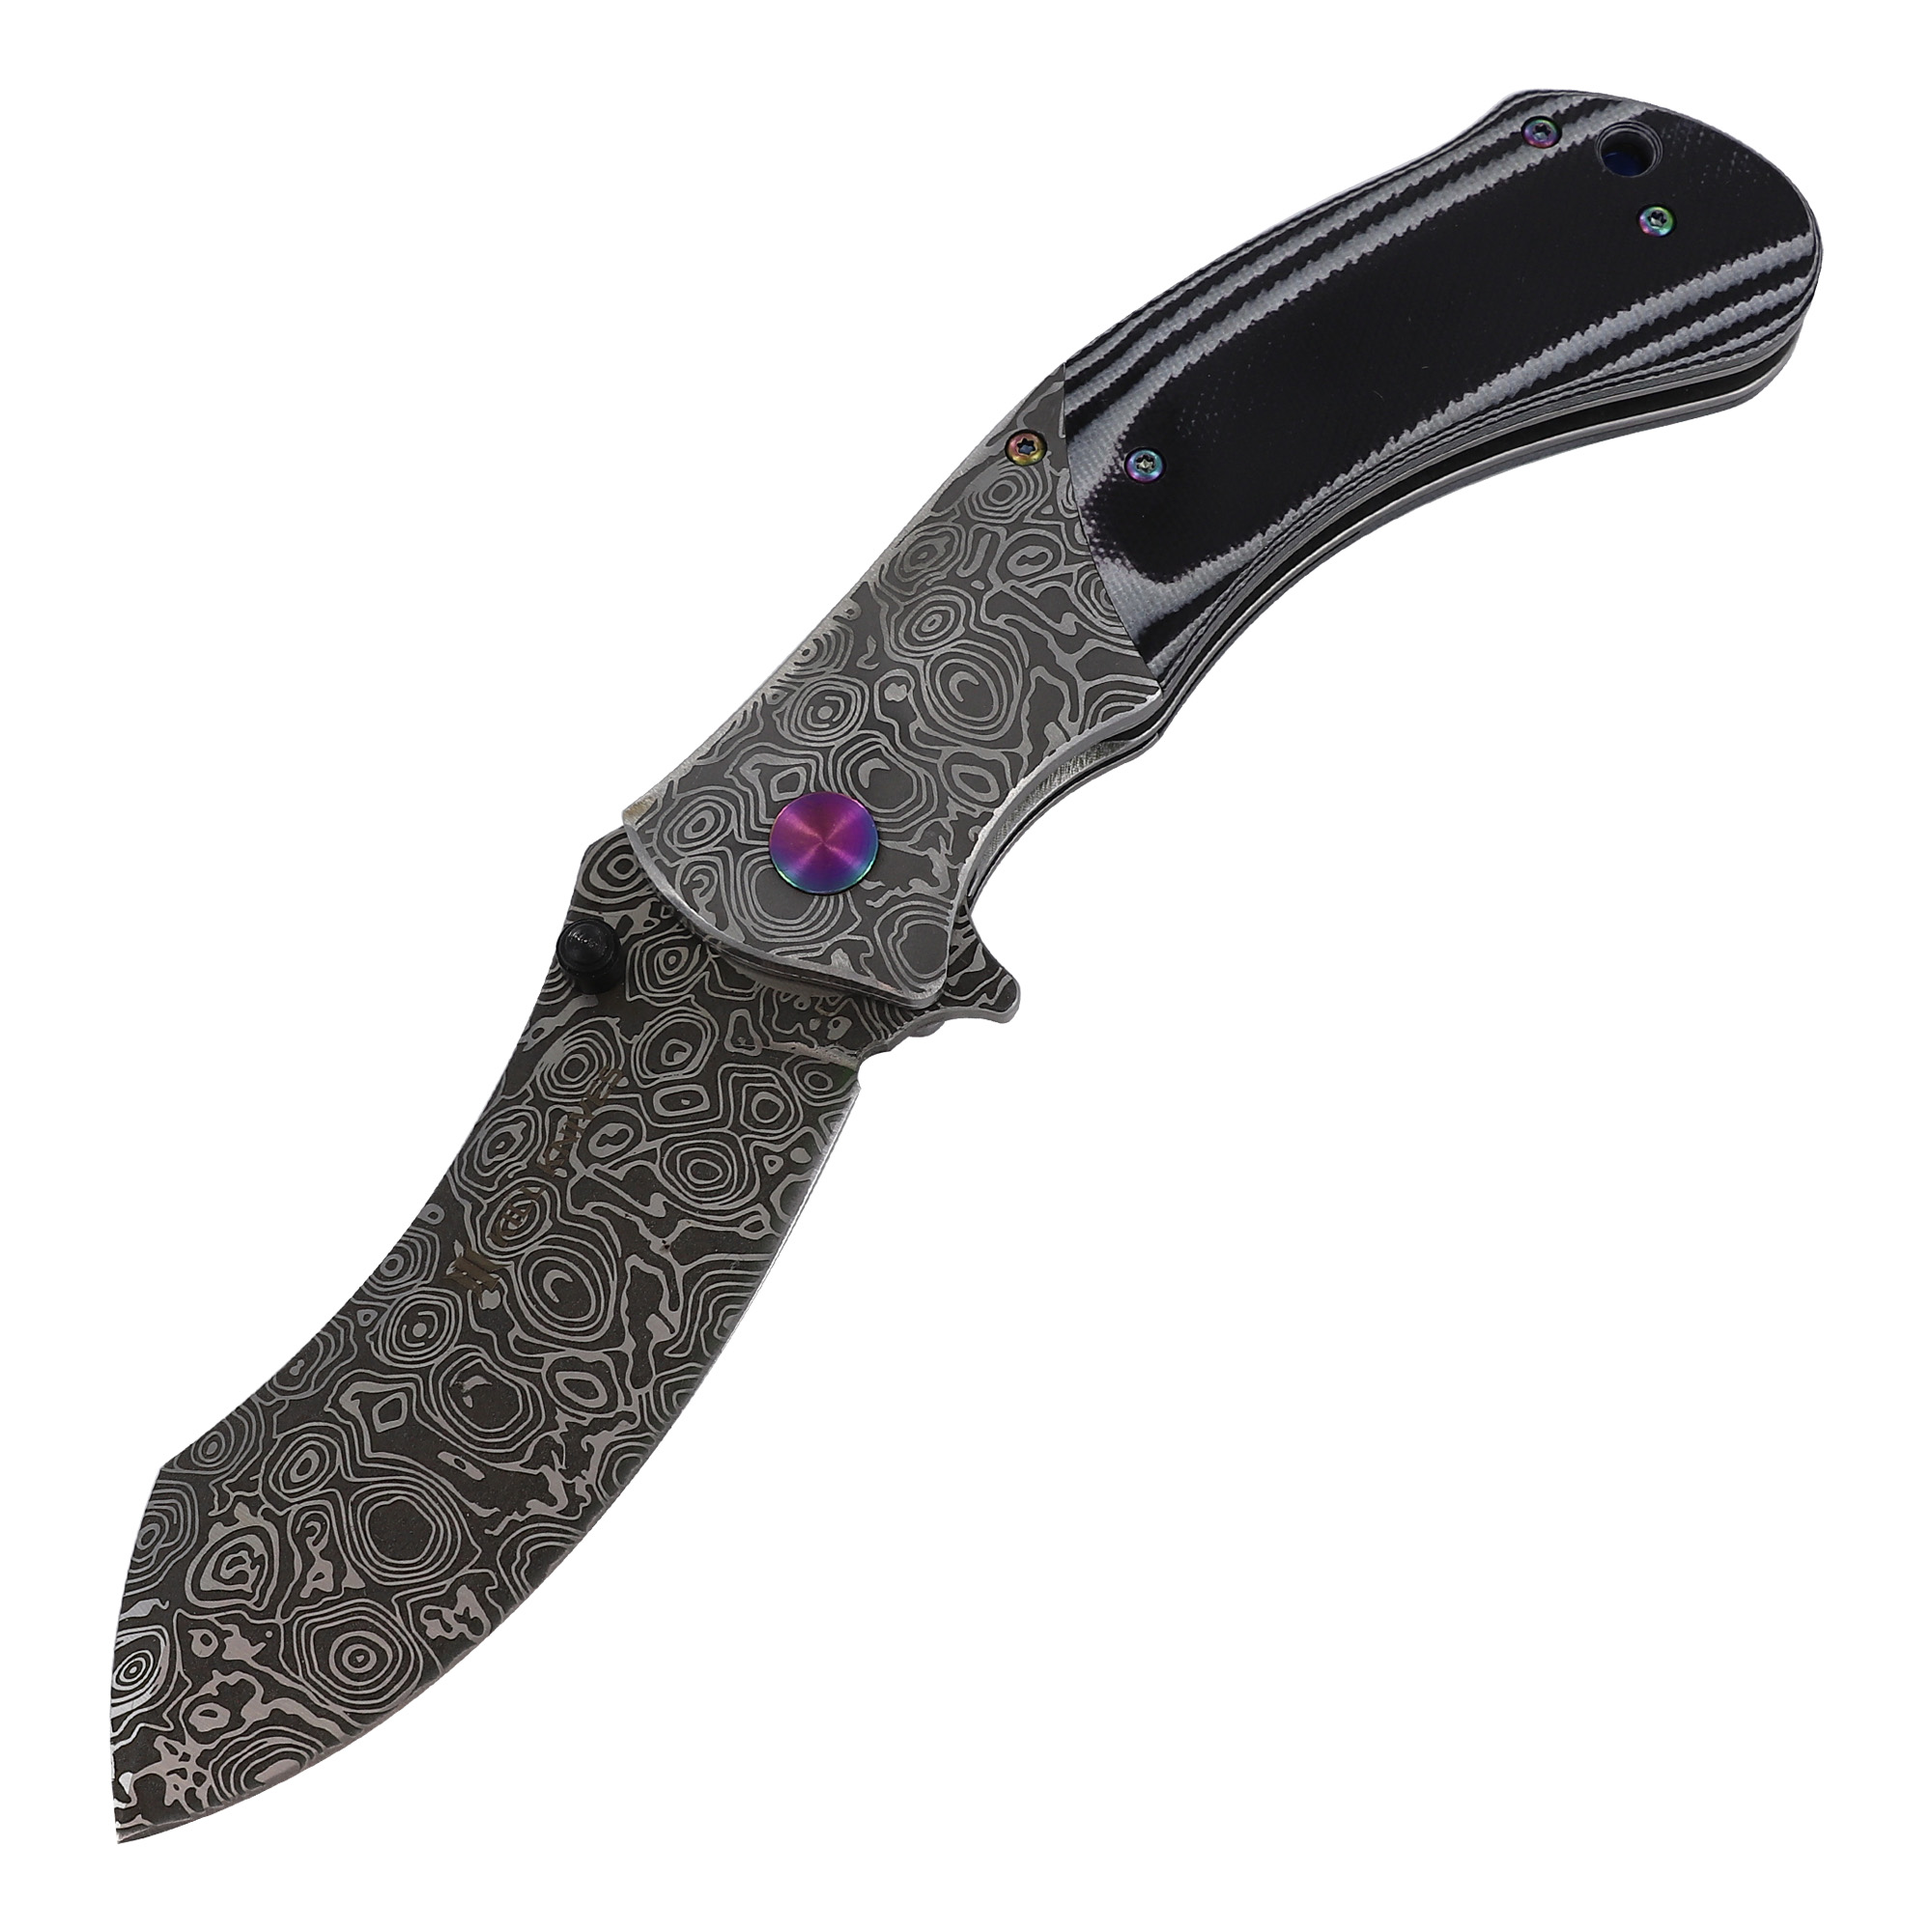 KILL KNIVES? Battle of One Heavy Duty Ball Bearing Spring Assisted Nessmuk Blade Pocket KNIFE